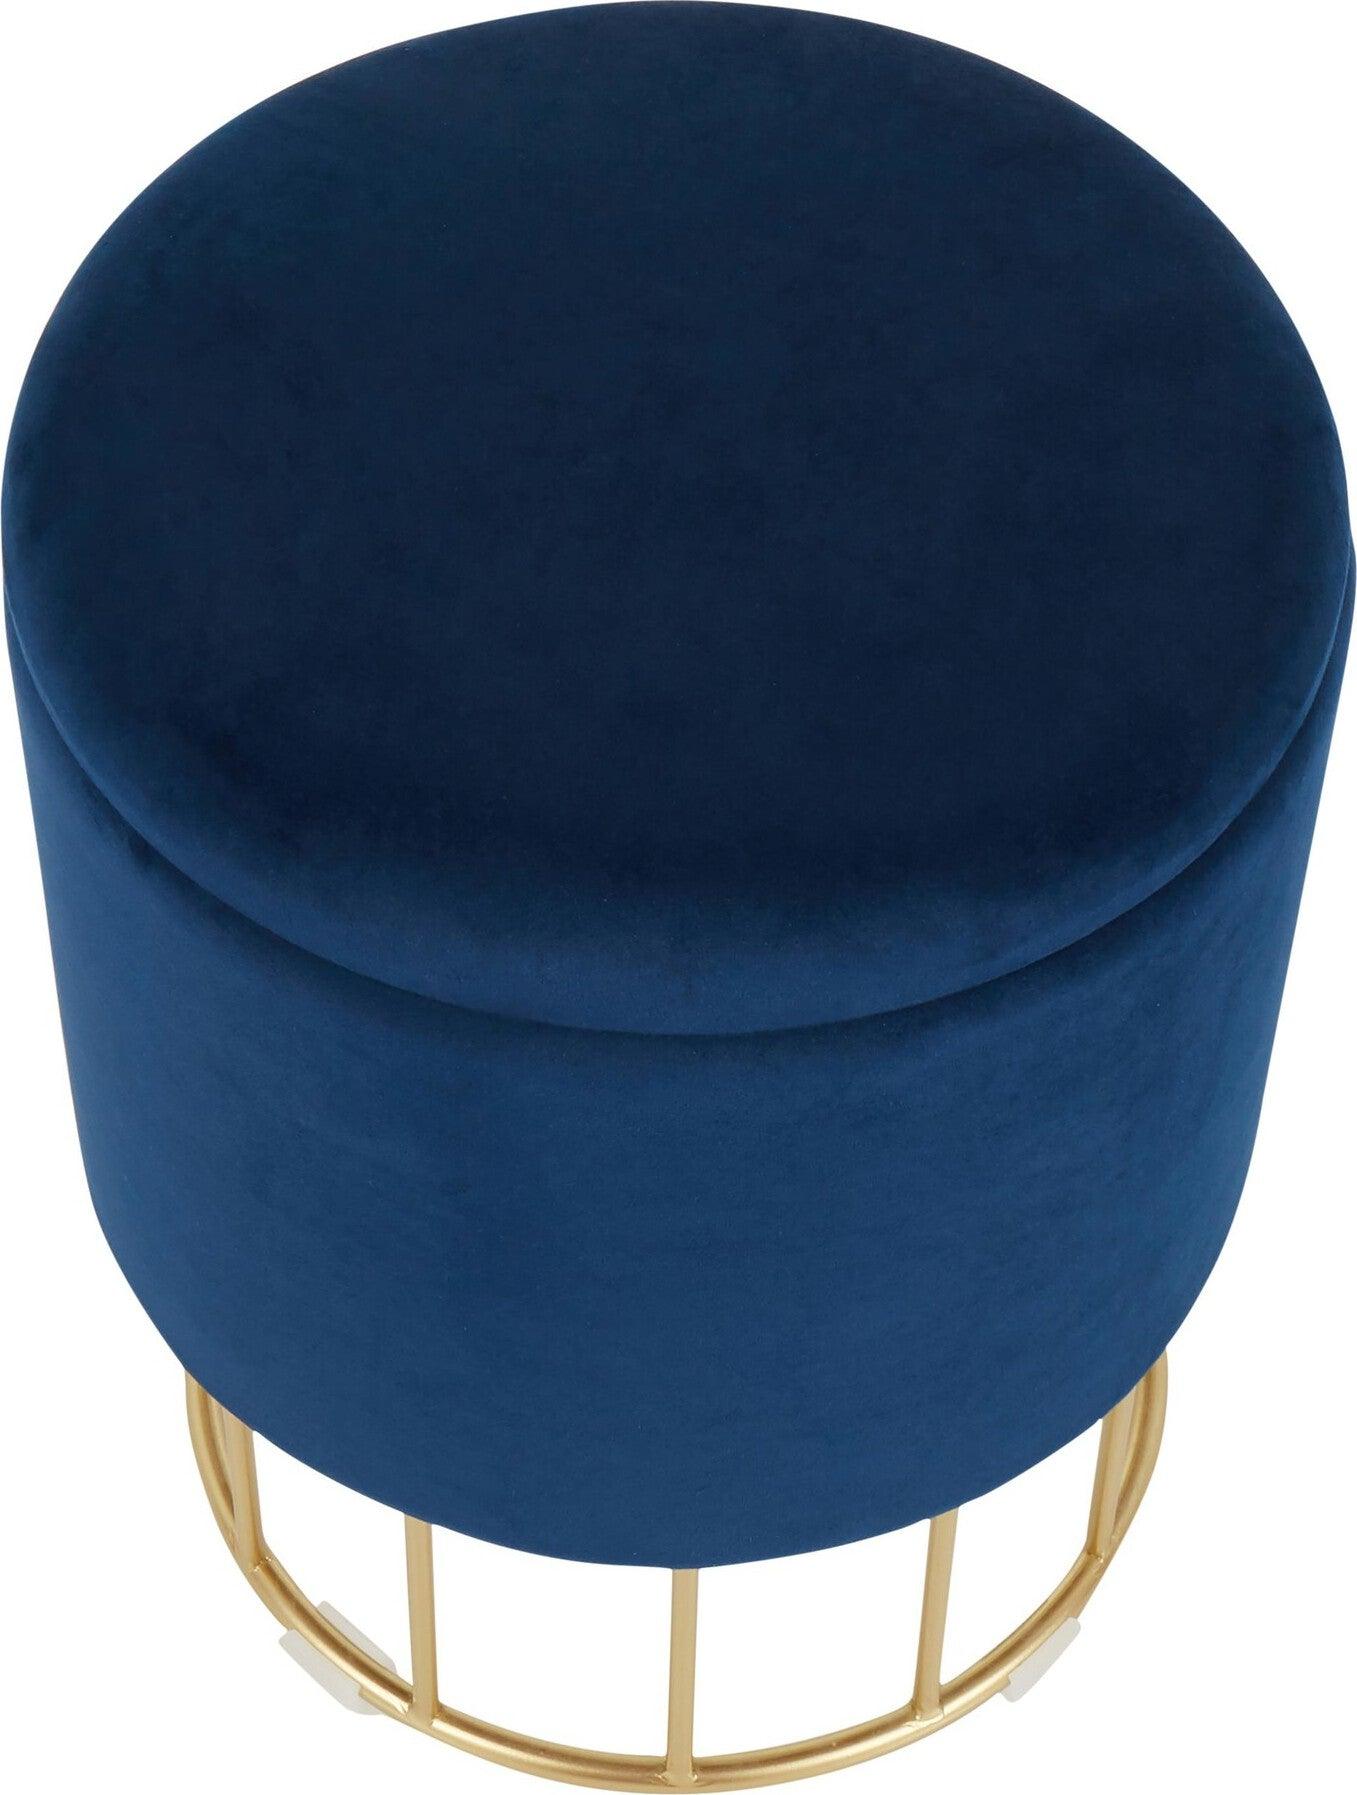 Lumisource Ottomans & Stools - Canary Contemporary Ottoman Gold Metal & Blue Velvet